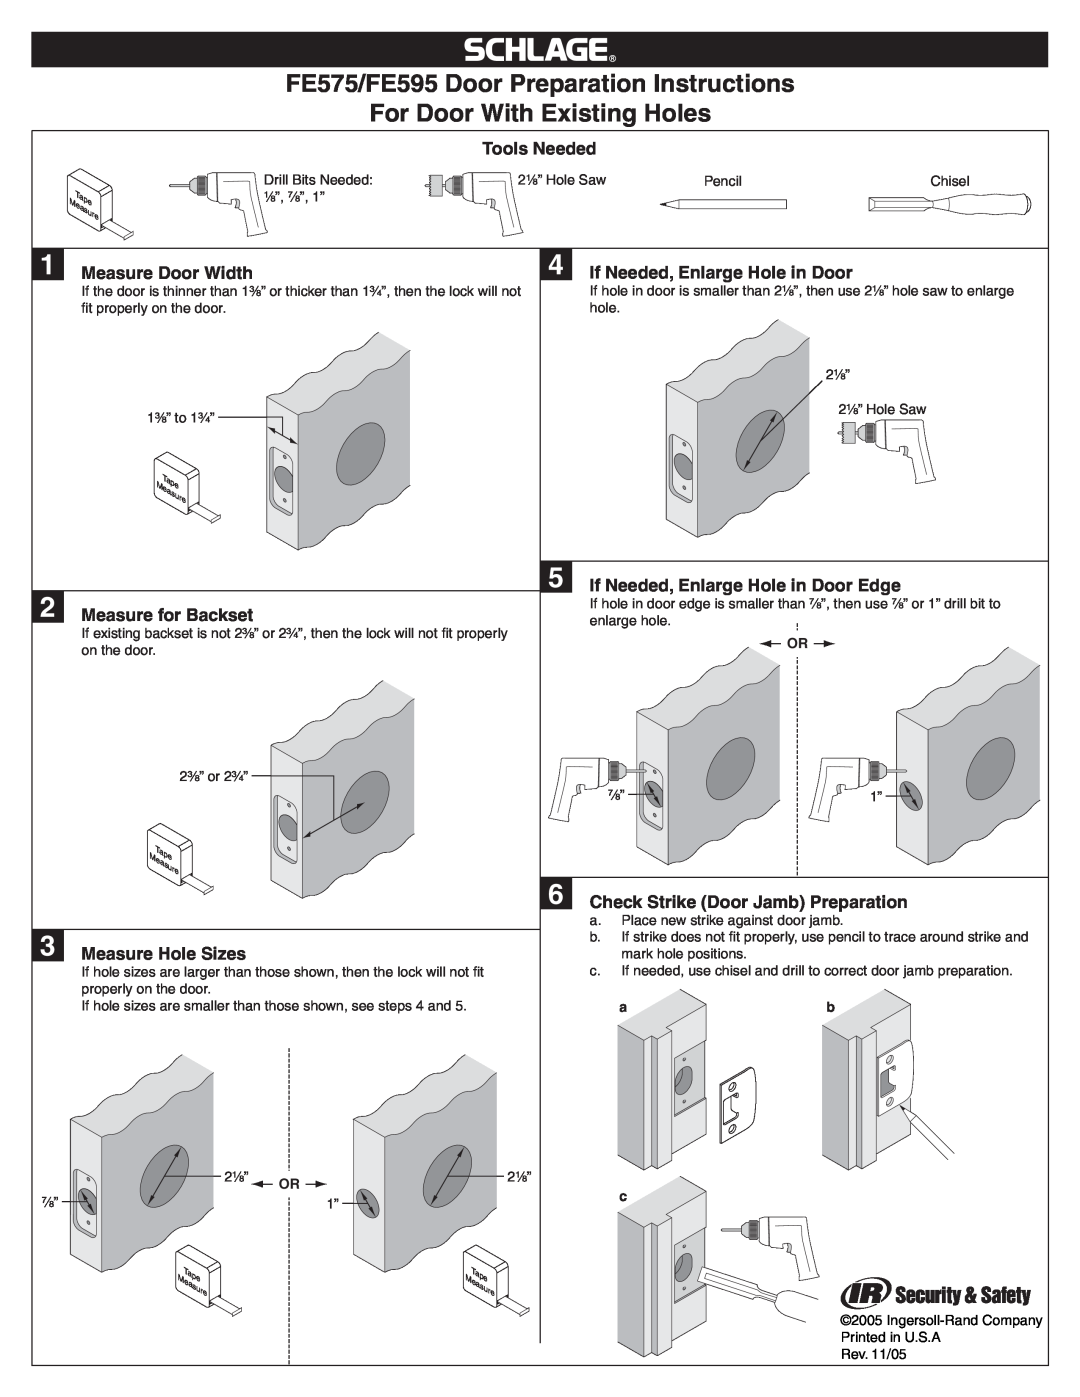 Ingersoll-Rand manual FE575/FE595 Door Preparation Instructions, For Door With Existing Holes, Tools Needed 